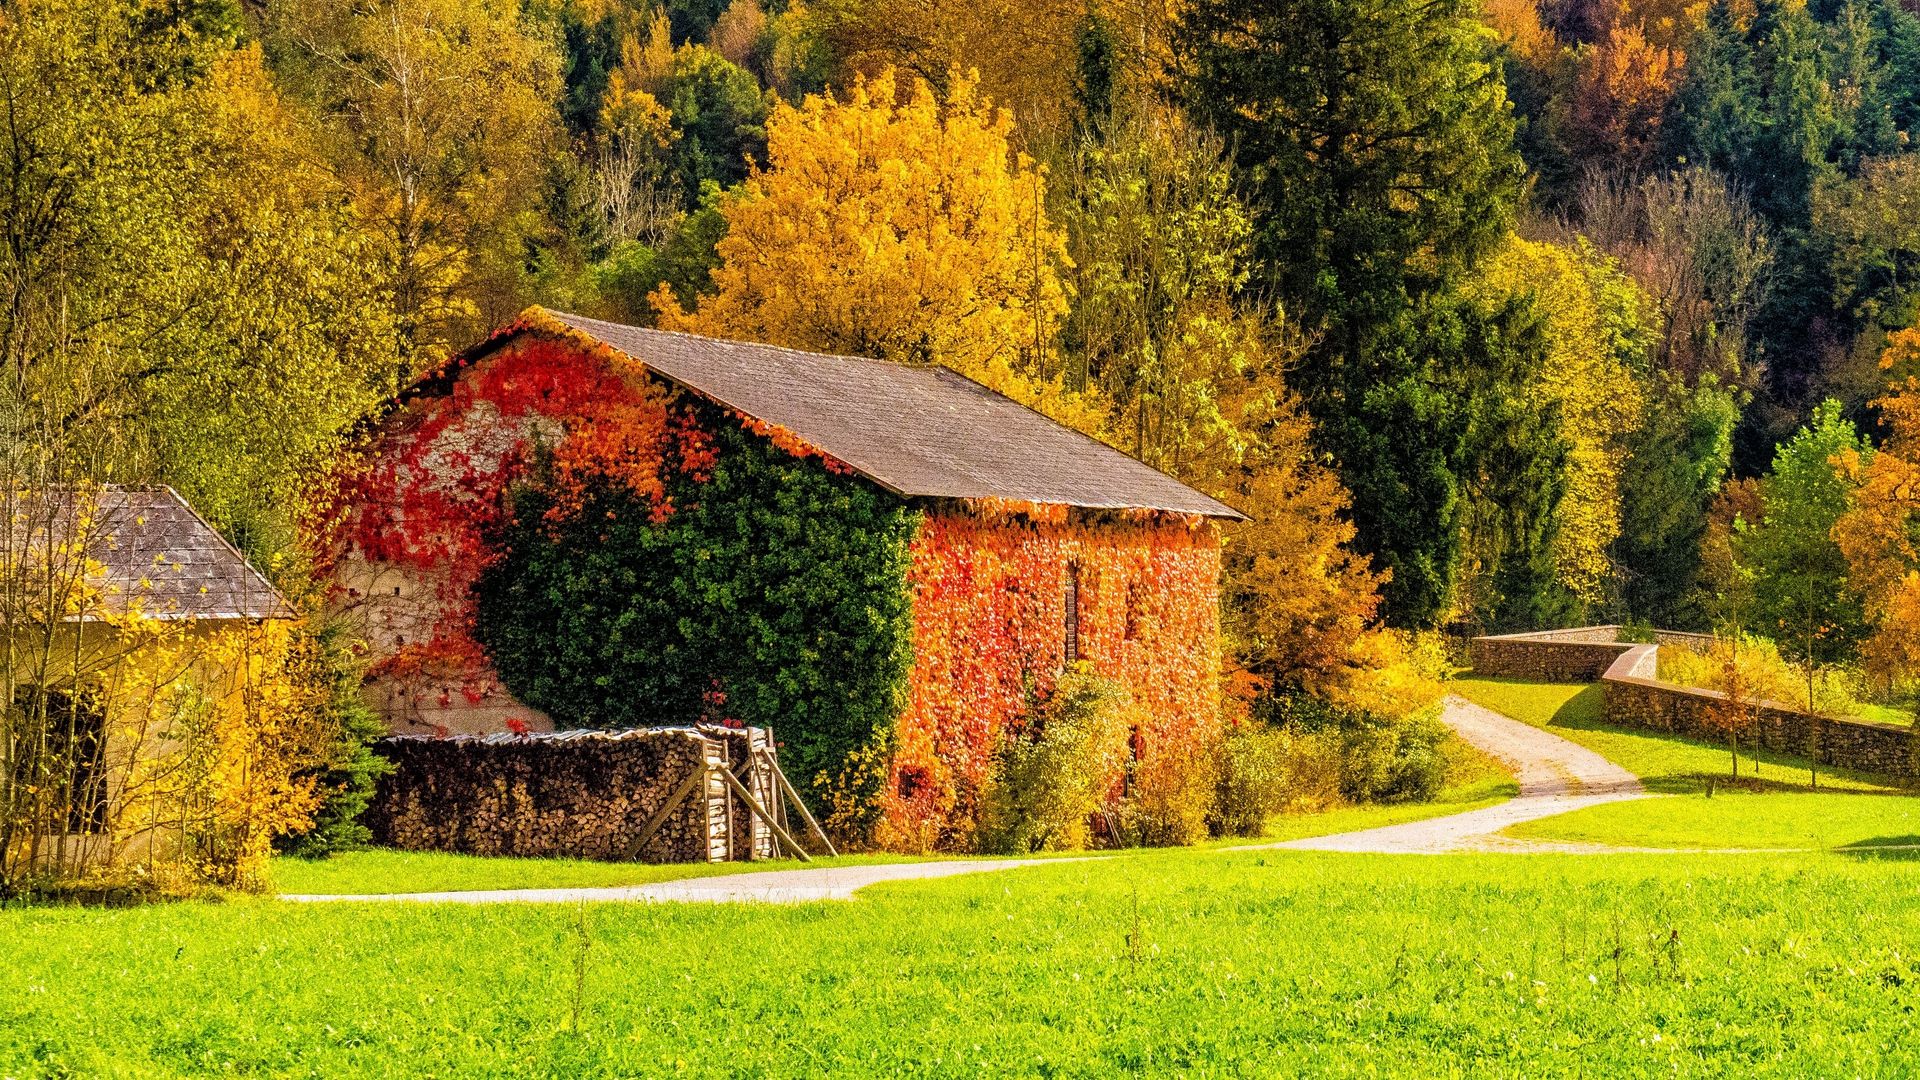 Green Grass And Old Cottage Autumn Nature HD Image Free Wallpaper